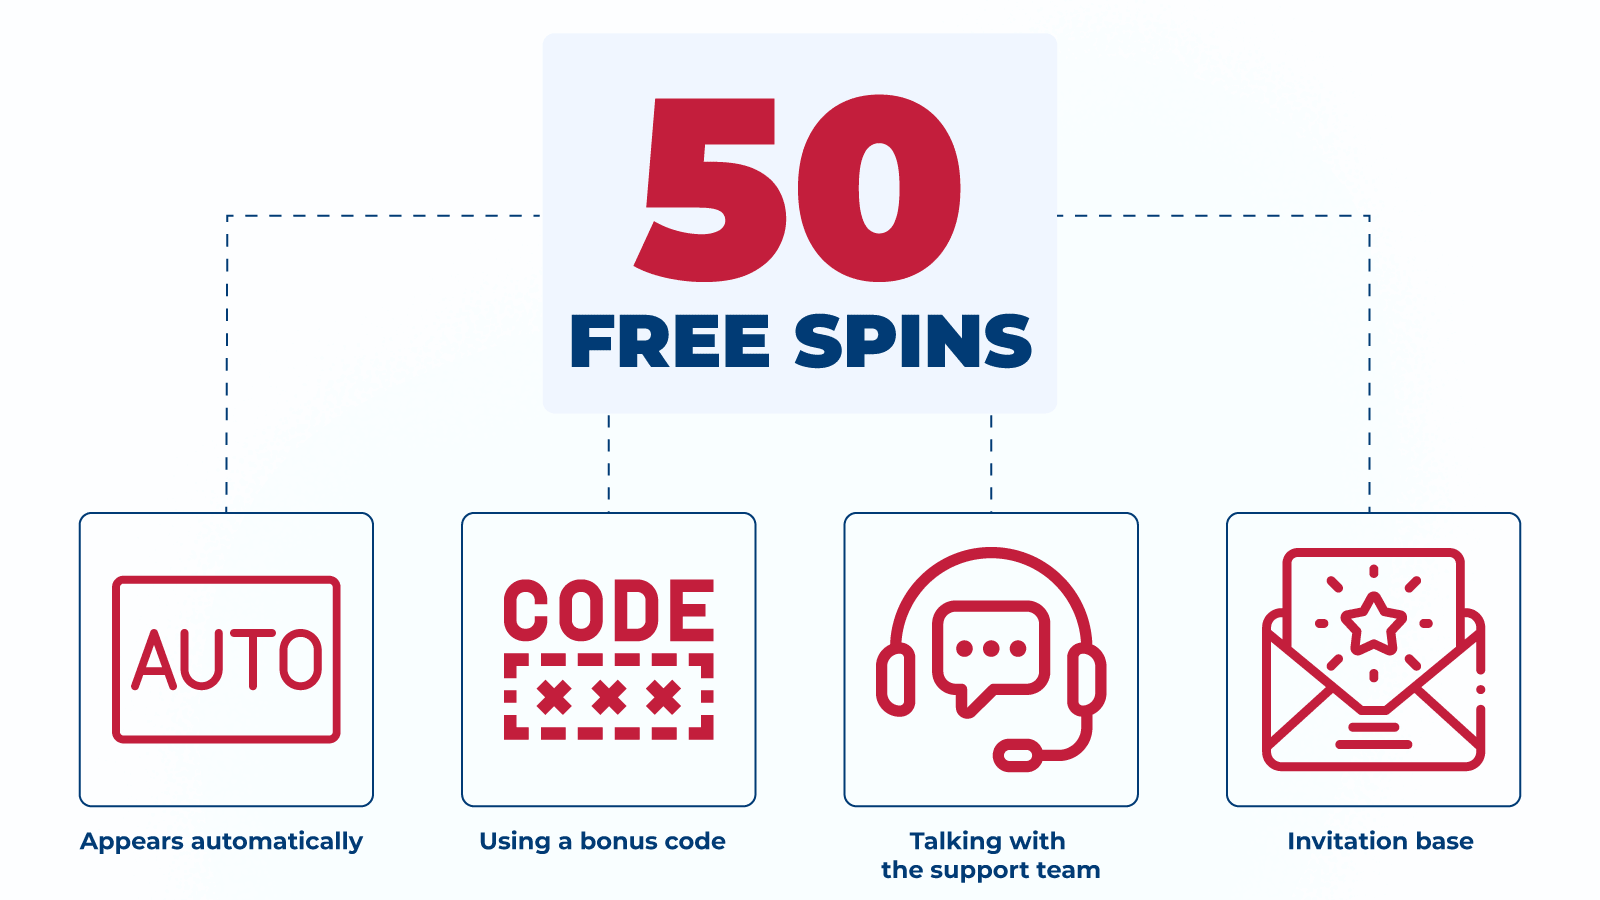 How to Claim 50 Free Spins No Deposit in the UK